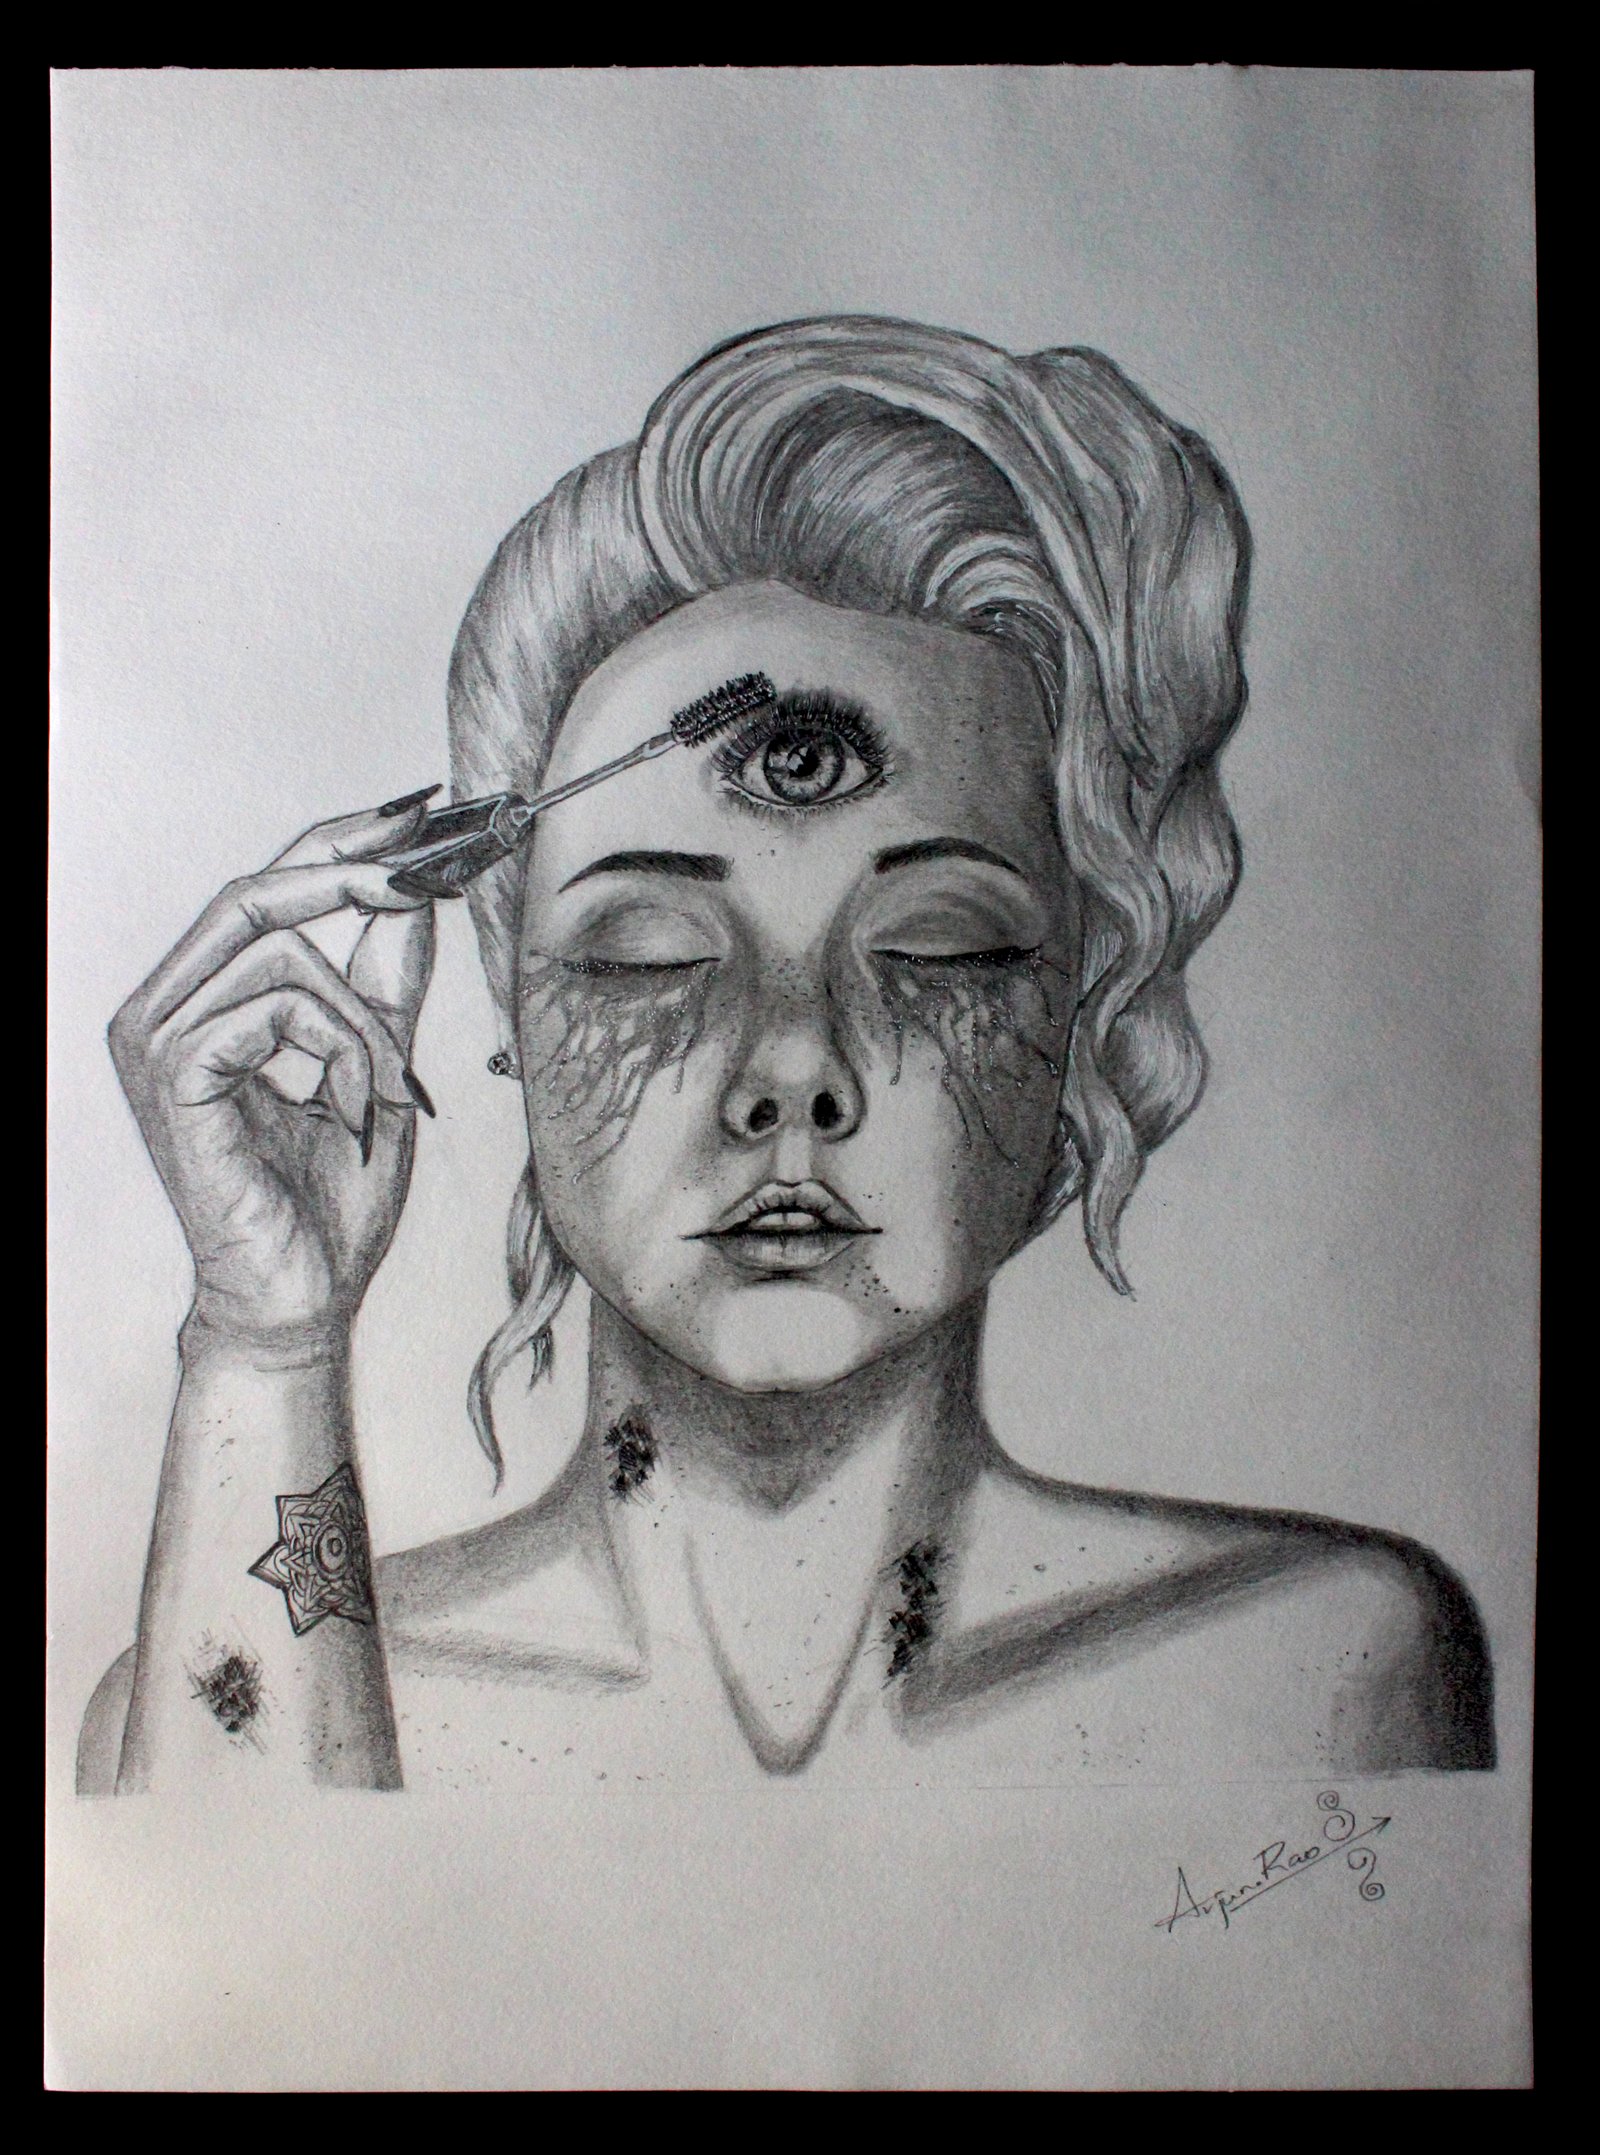 Open up your third eye.